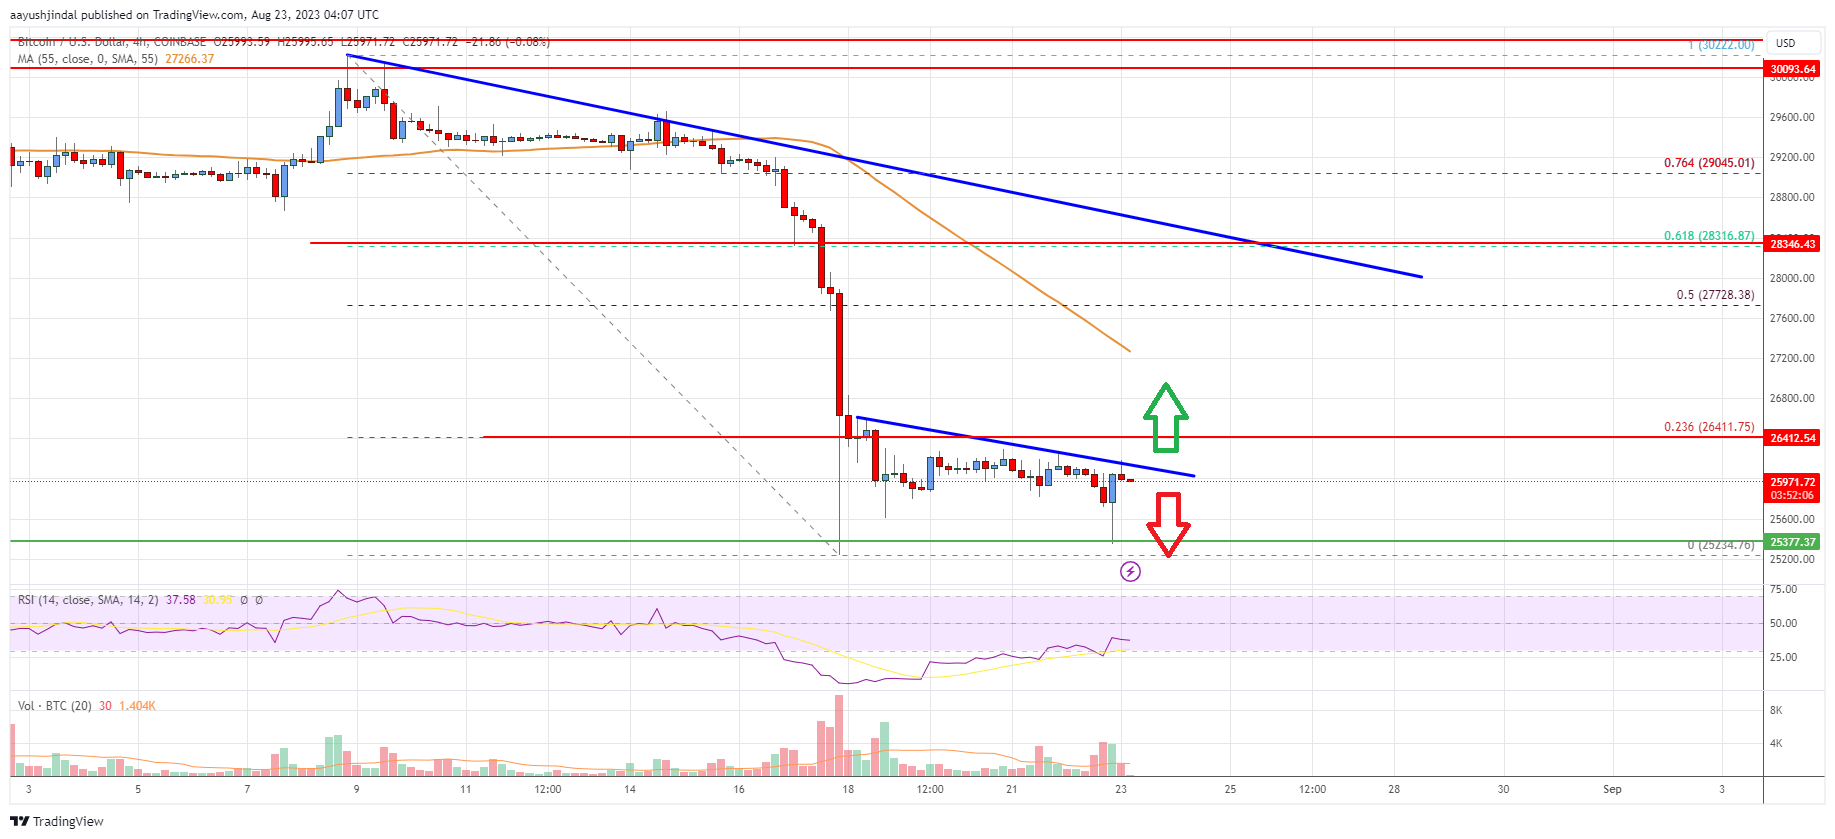 Bitcoin Price Analysis: BTC Could Extend Losses Below $25K